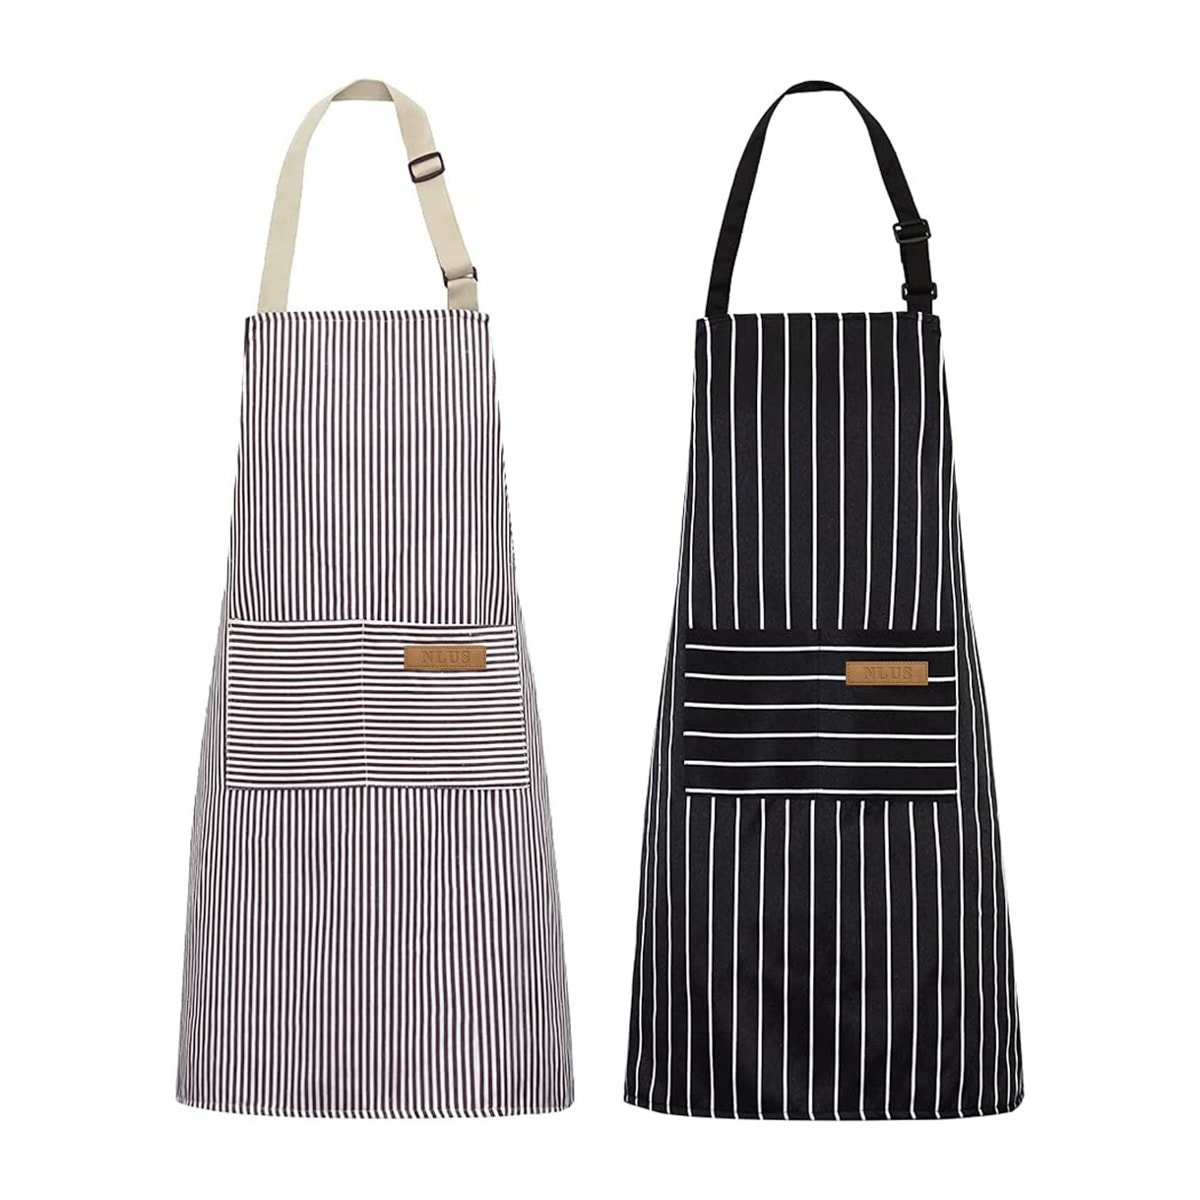 A white and gray striped apron and a black and white striped apron with adjustable straps that go around one's neck.